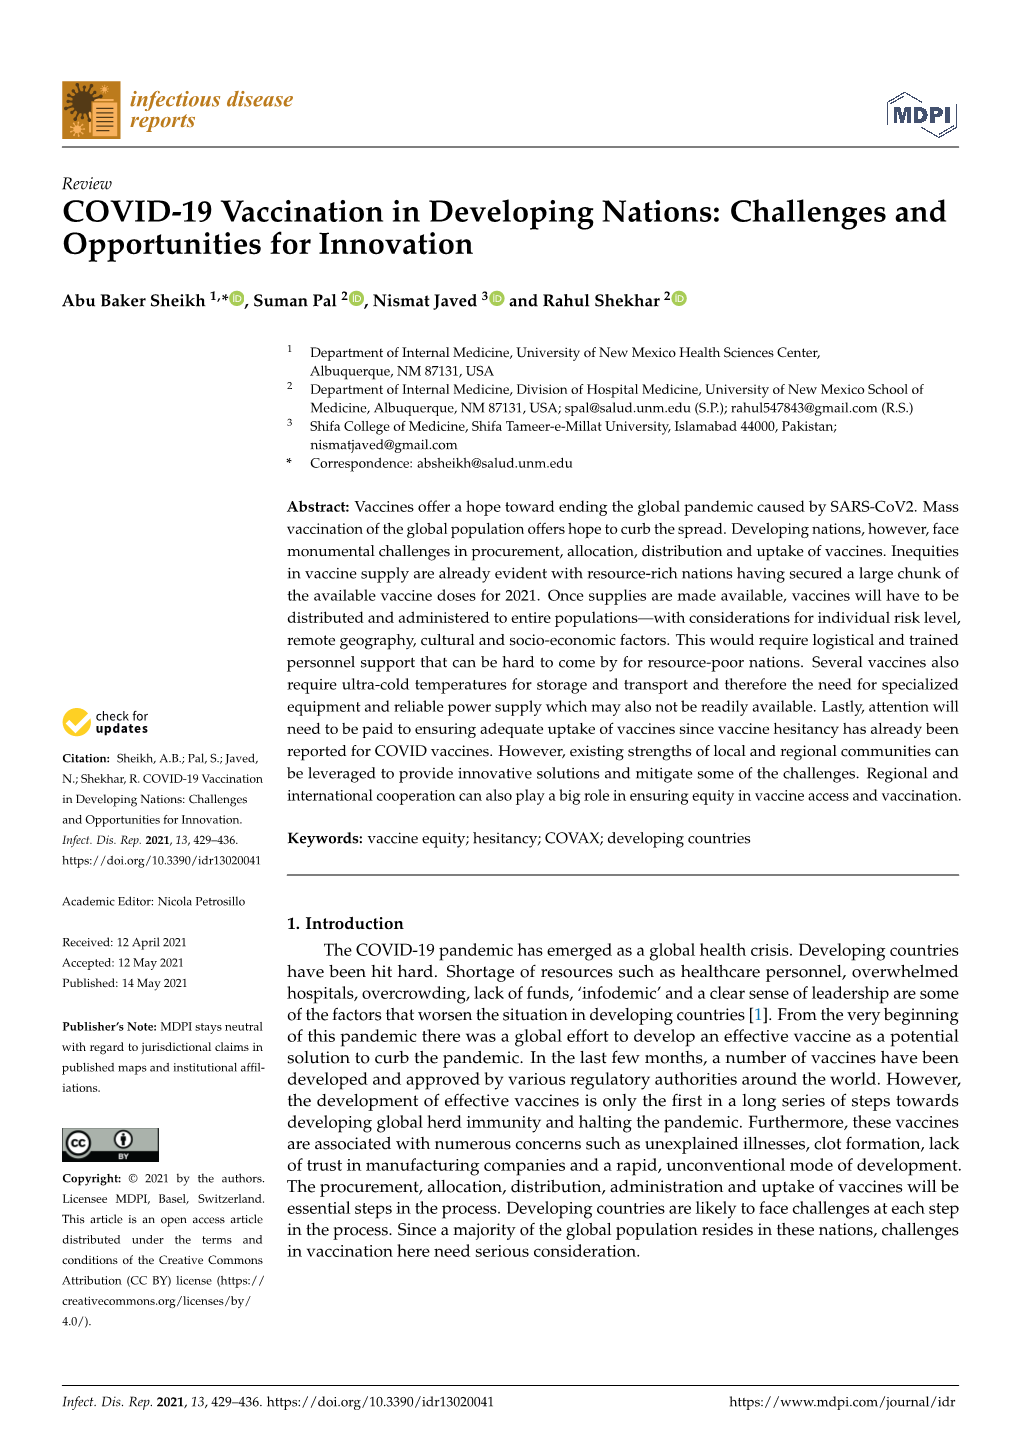 COVID-19 Vaccination in Developing Nations: Challenges and Opportunities for Innovation